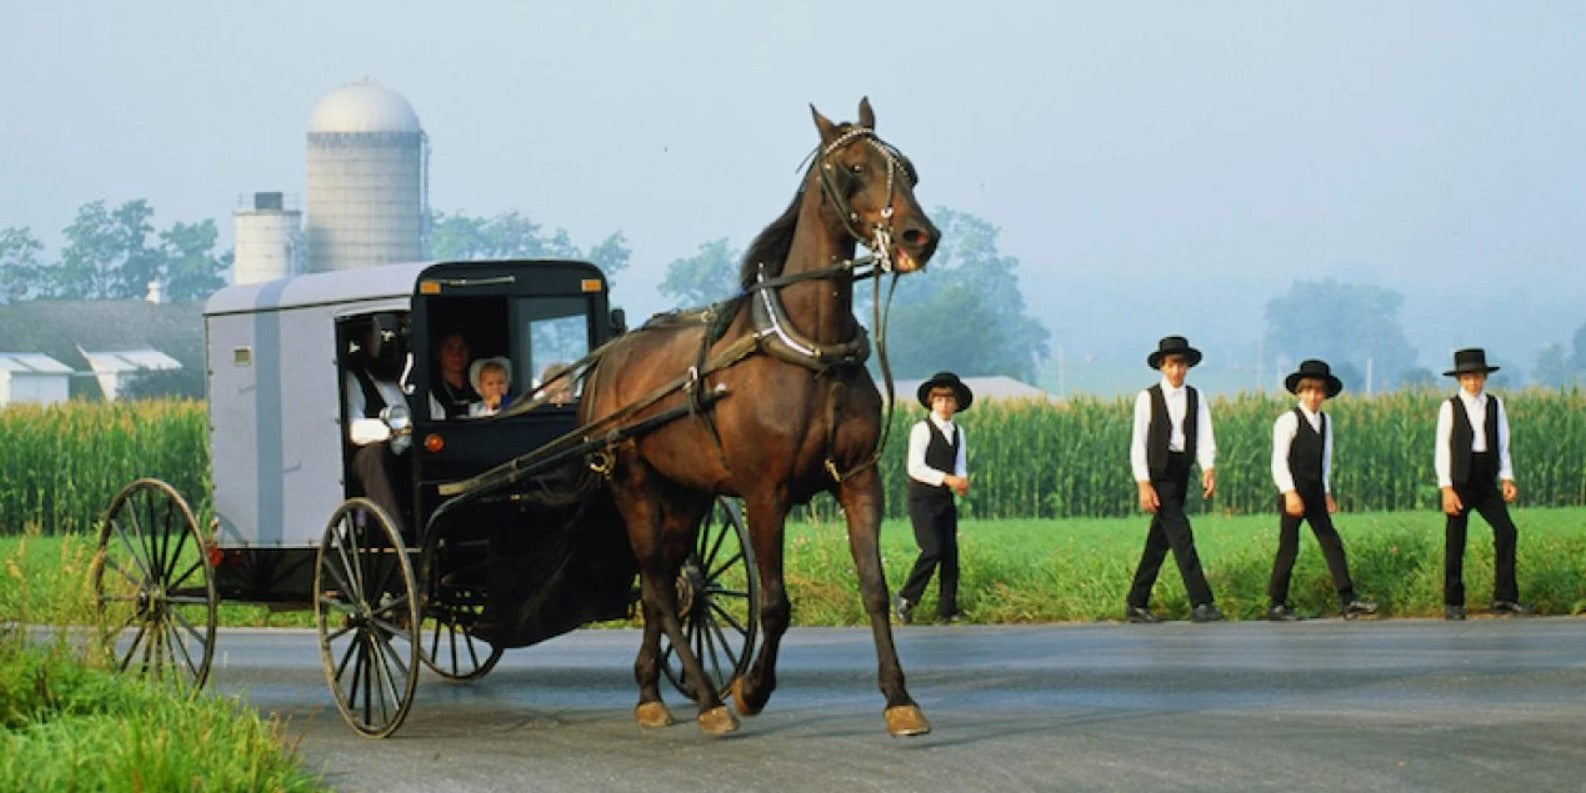 The Amish have skills that everyone should know in order to survive a natural disaster or emergency situation.  Having emergency supplies isn't good enough, you need to be prepared in every way. 